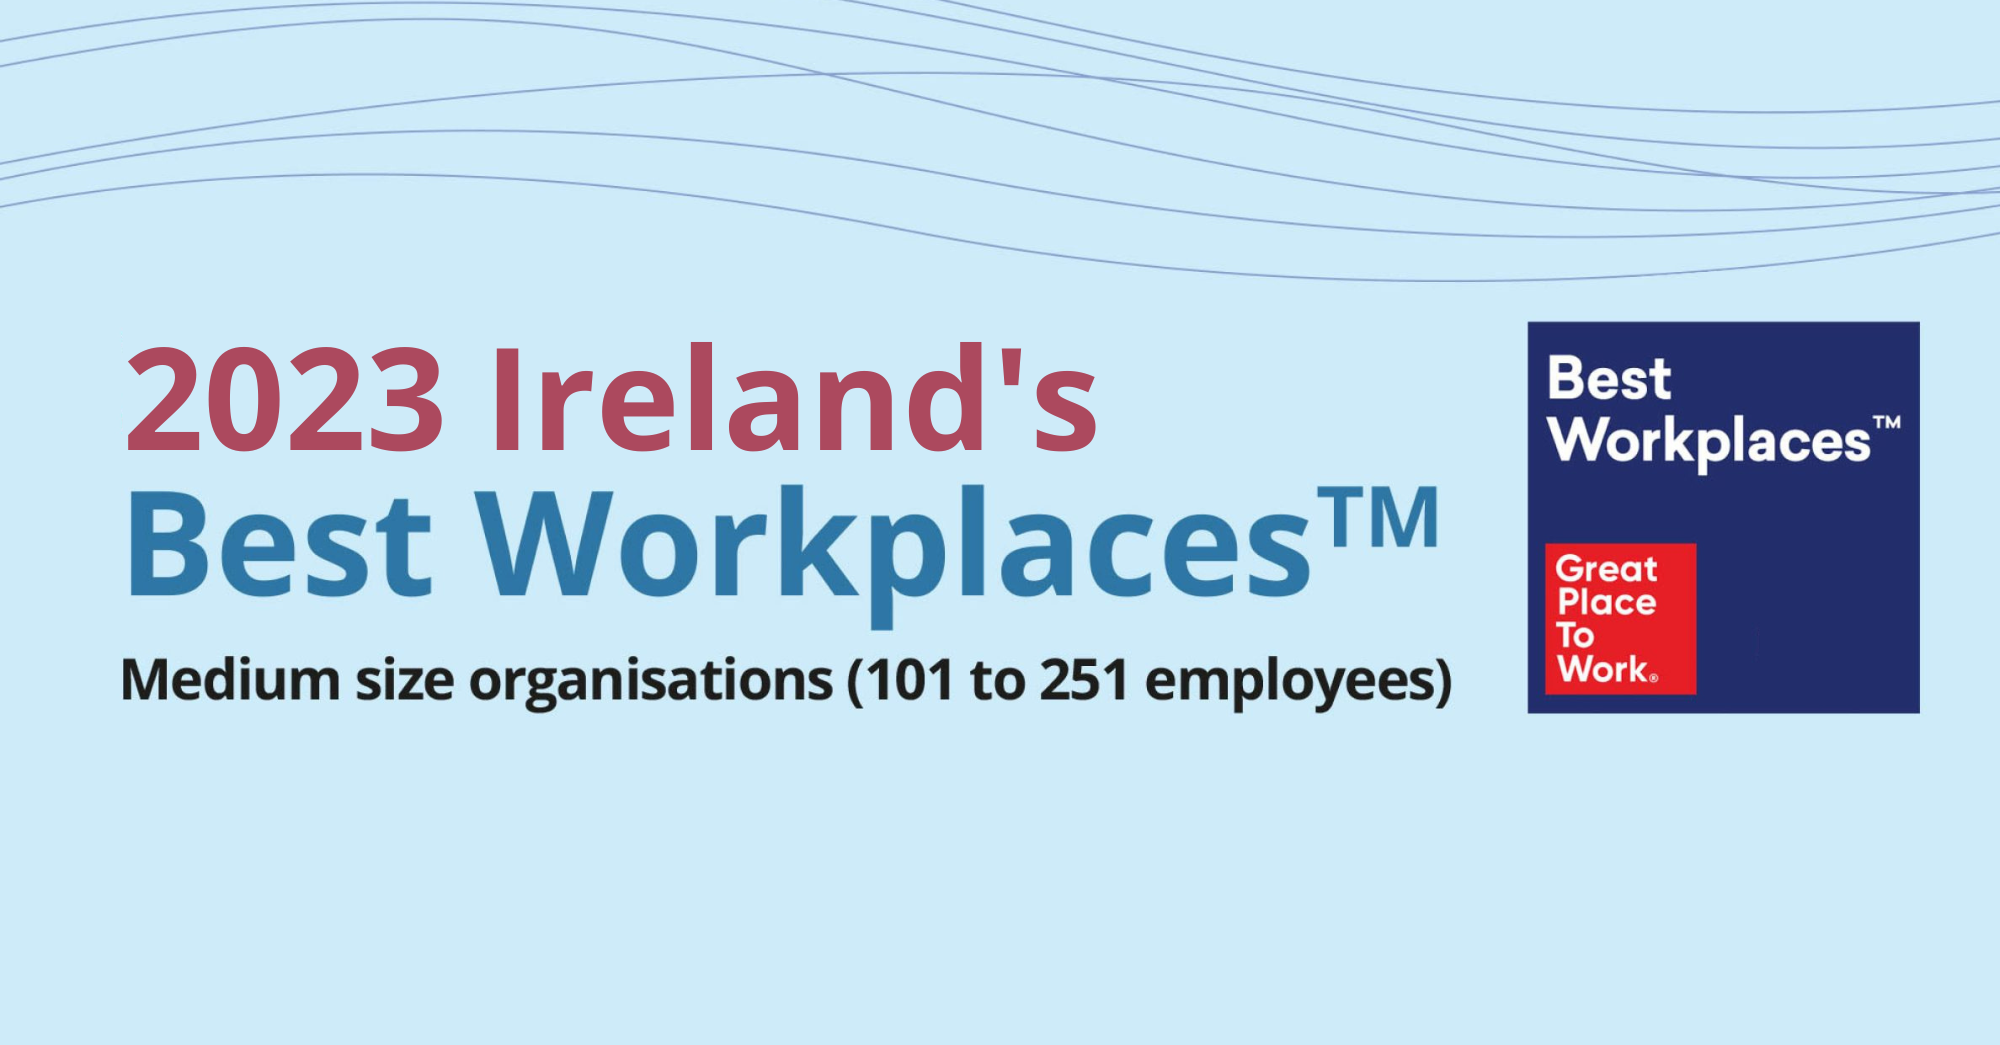 We’re one of Ireland’s Best Workplaces™ 2023